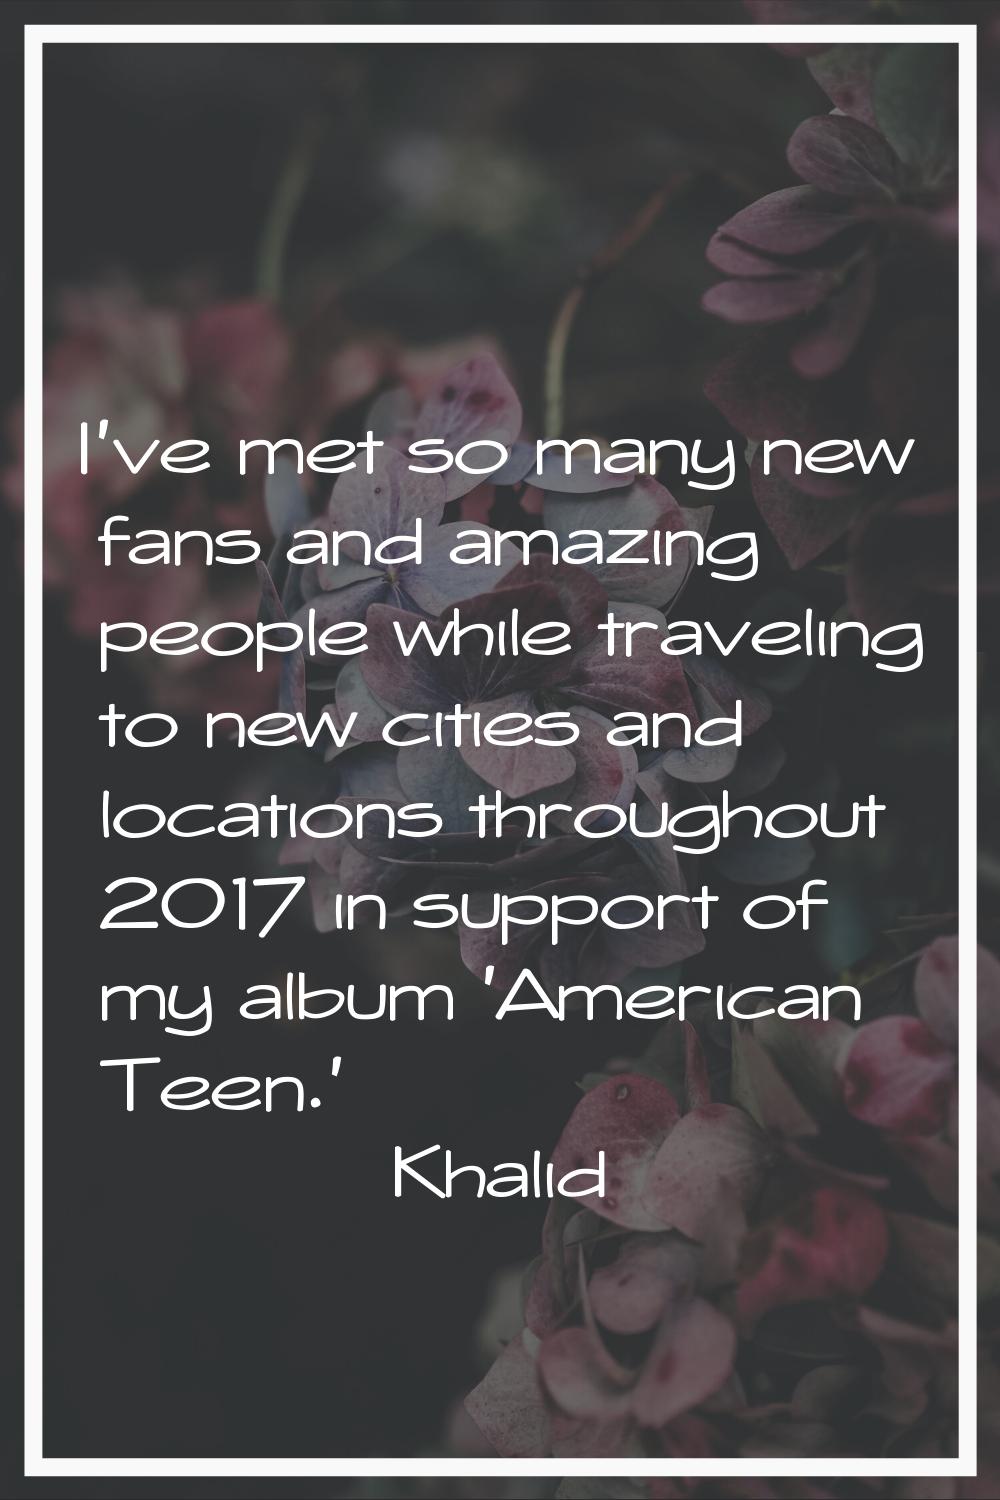 I've met so many new fans and amazing people while traveling to new cities and locations throughout